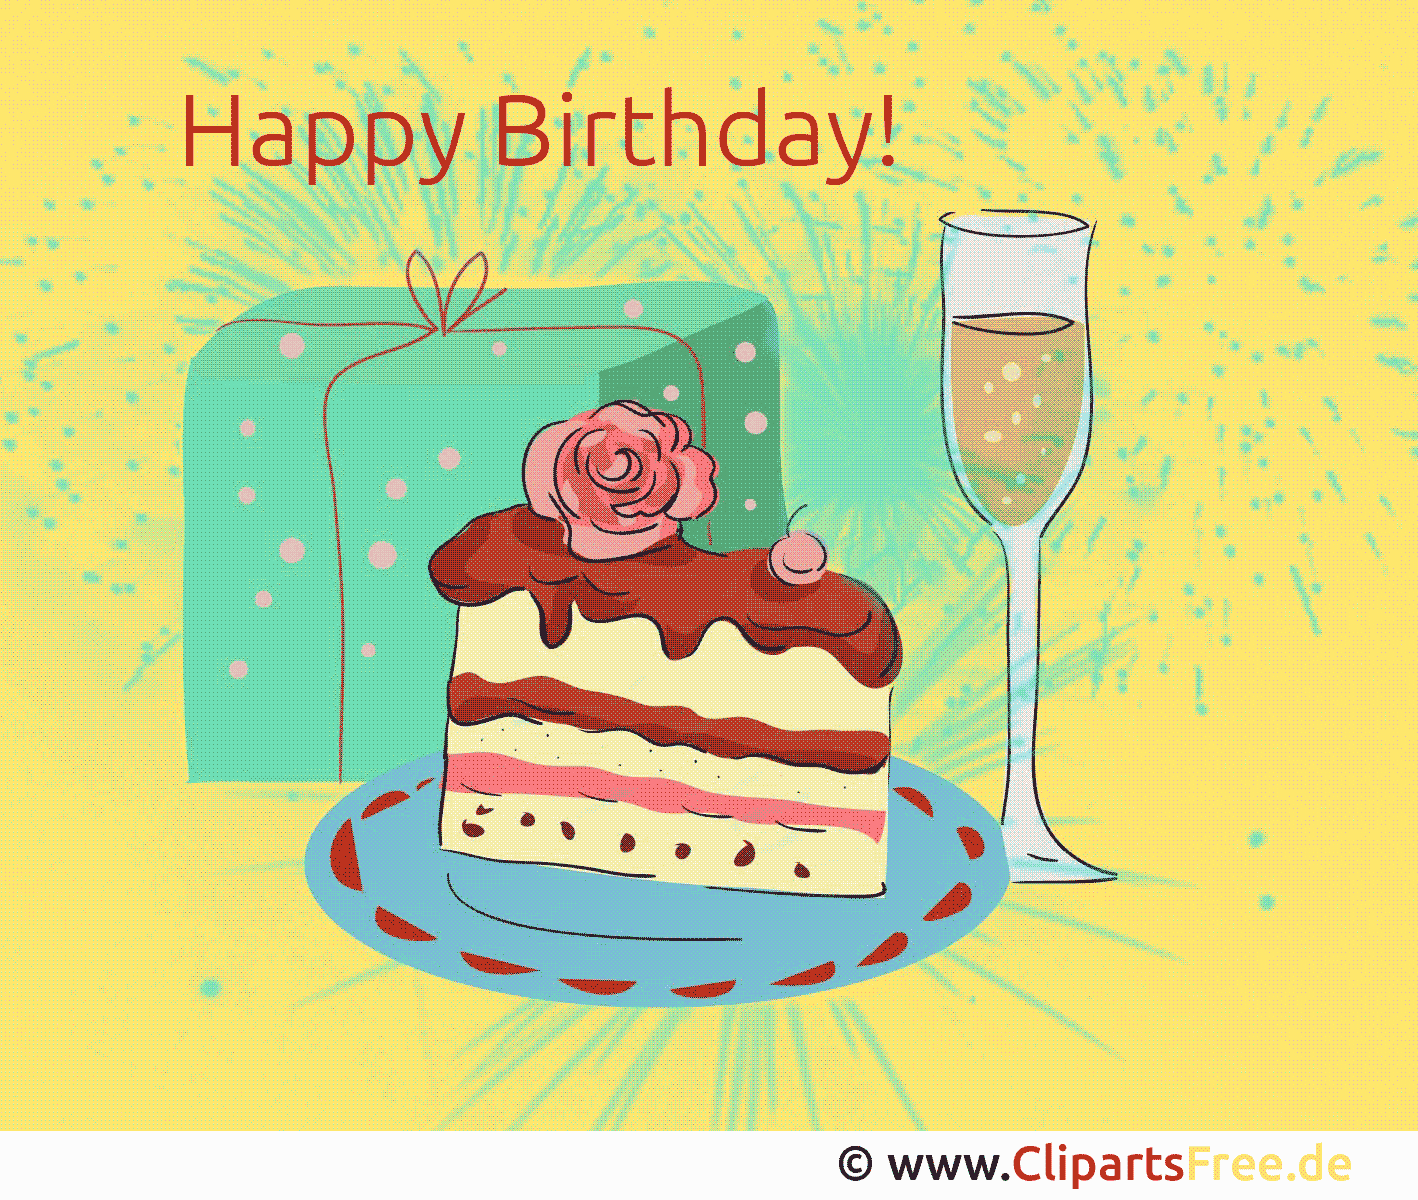 Free gif birthday, free images collection, illustration, free clipart, clip...